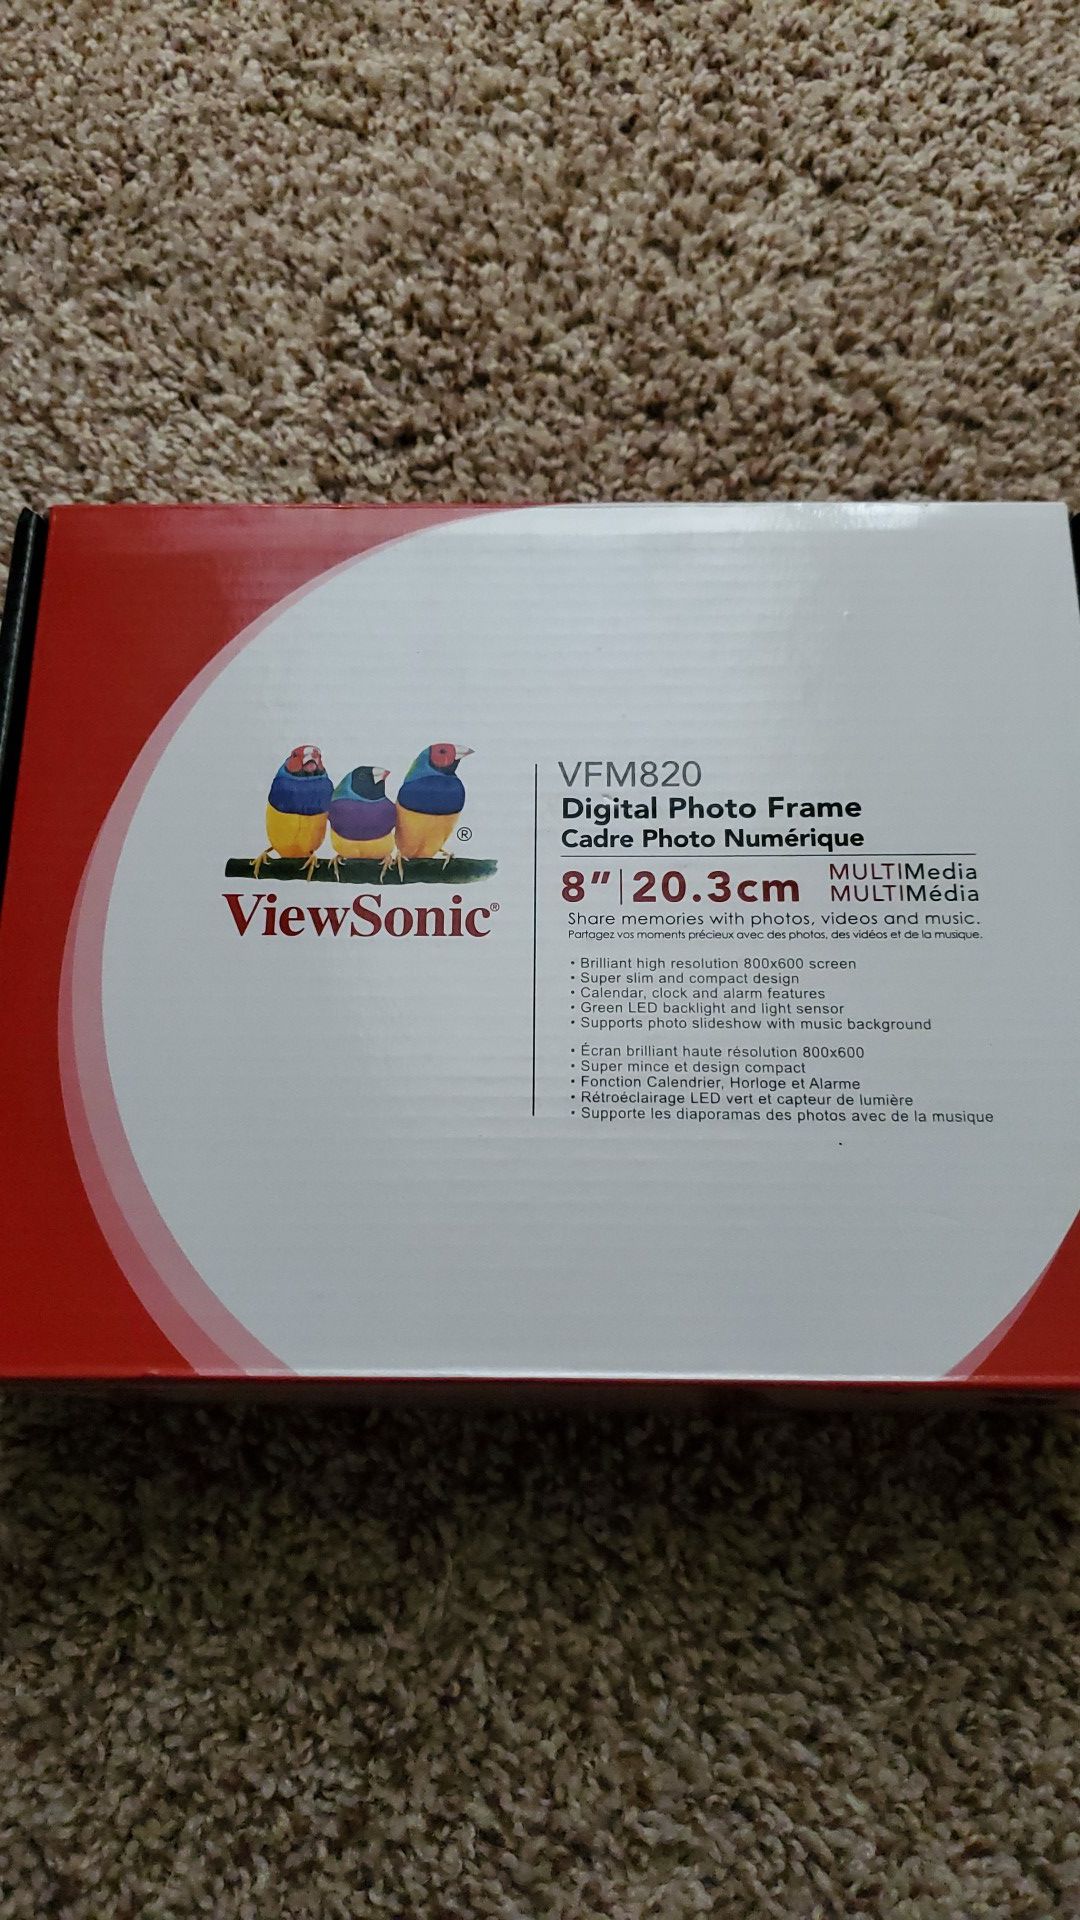 Viwesonic digital photo frame 8" working flawlessly